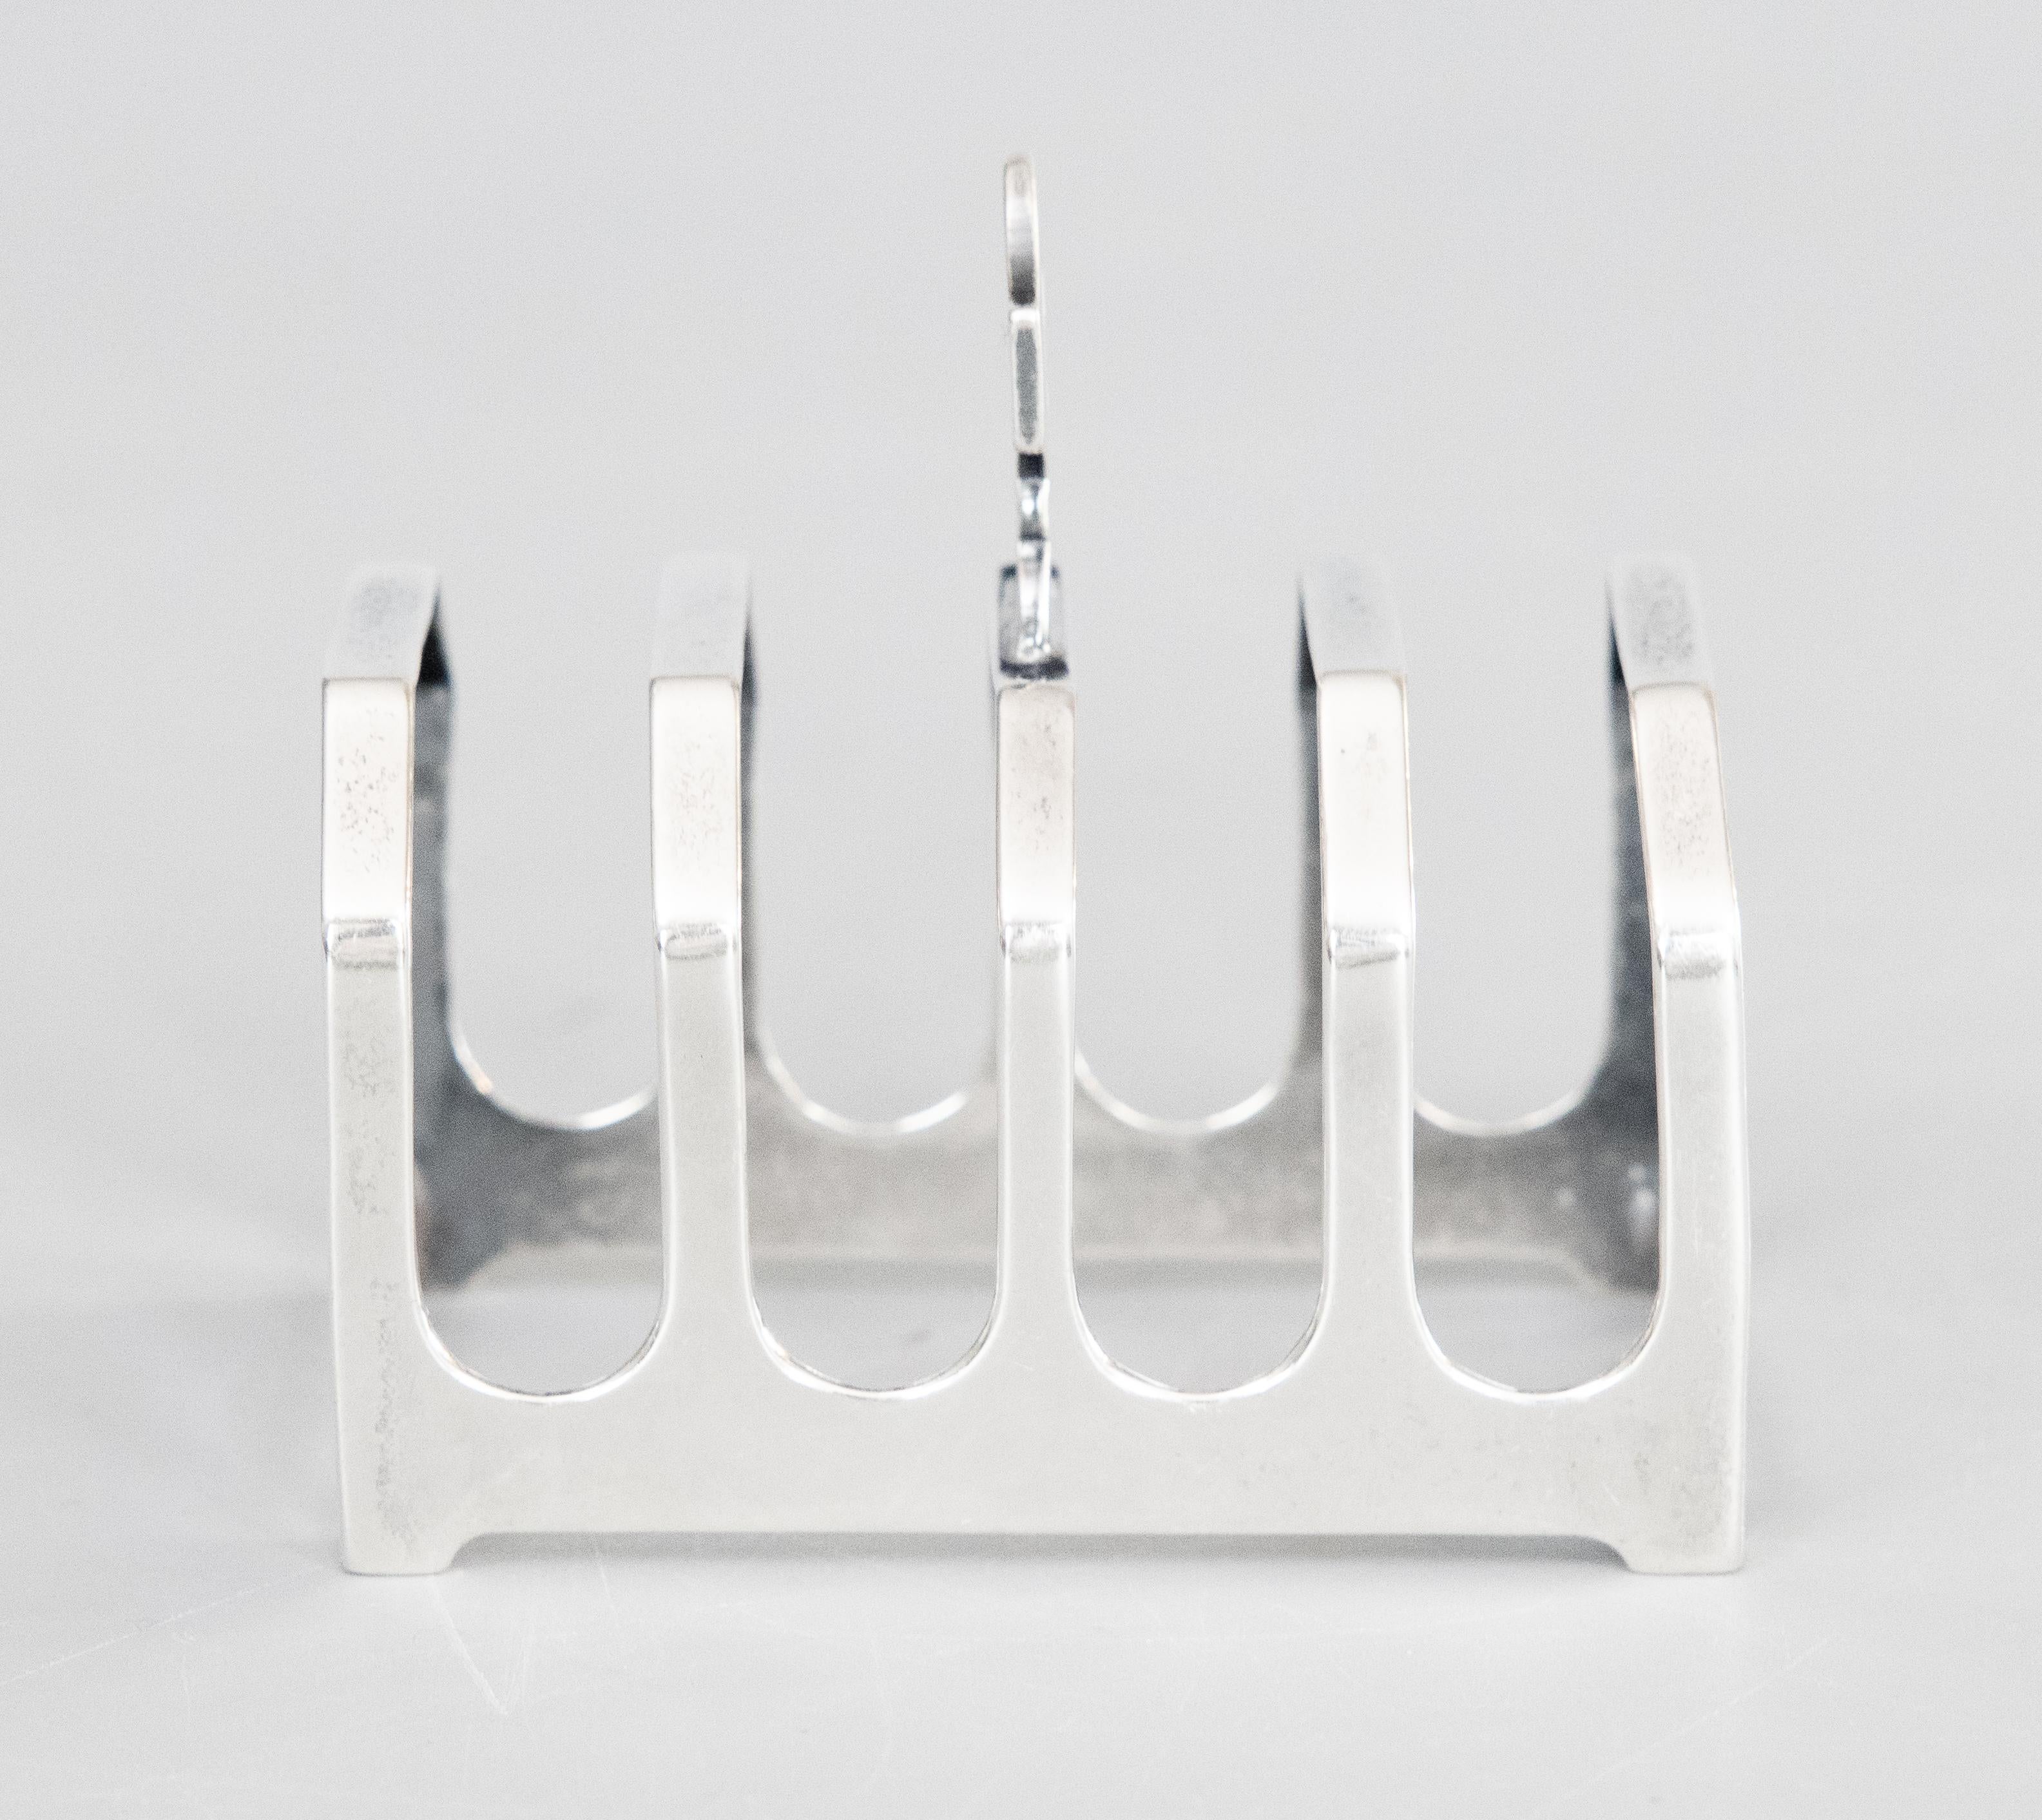 A lovely petite English sterling silver four slice toast rack by William Bruford & Son Ltd, London, dated 1936. Hallmarks on reverse. This fine quality silver toast rack is well made with with a lovely Art Deco style geometric shape and decorative